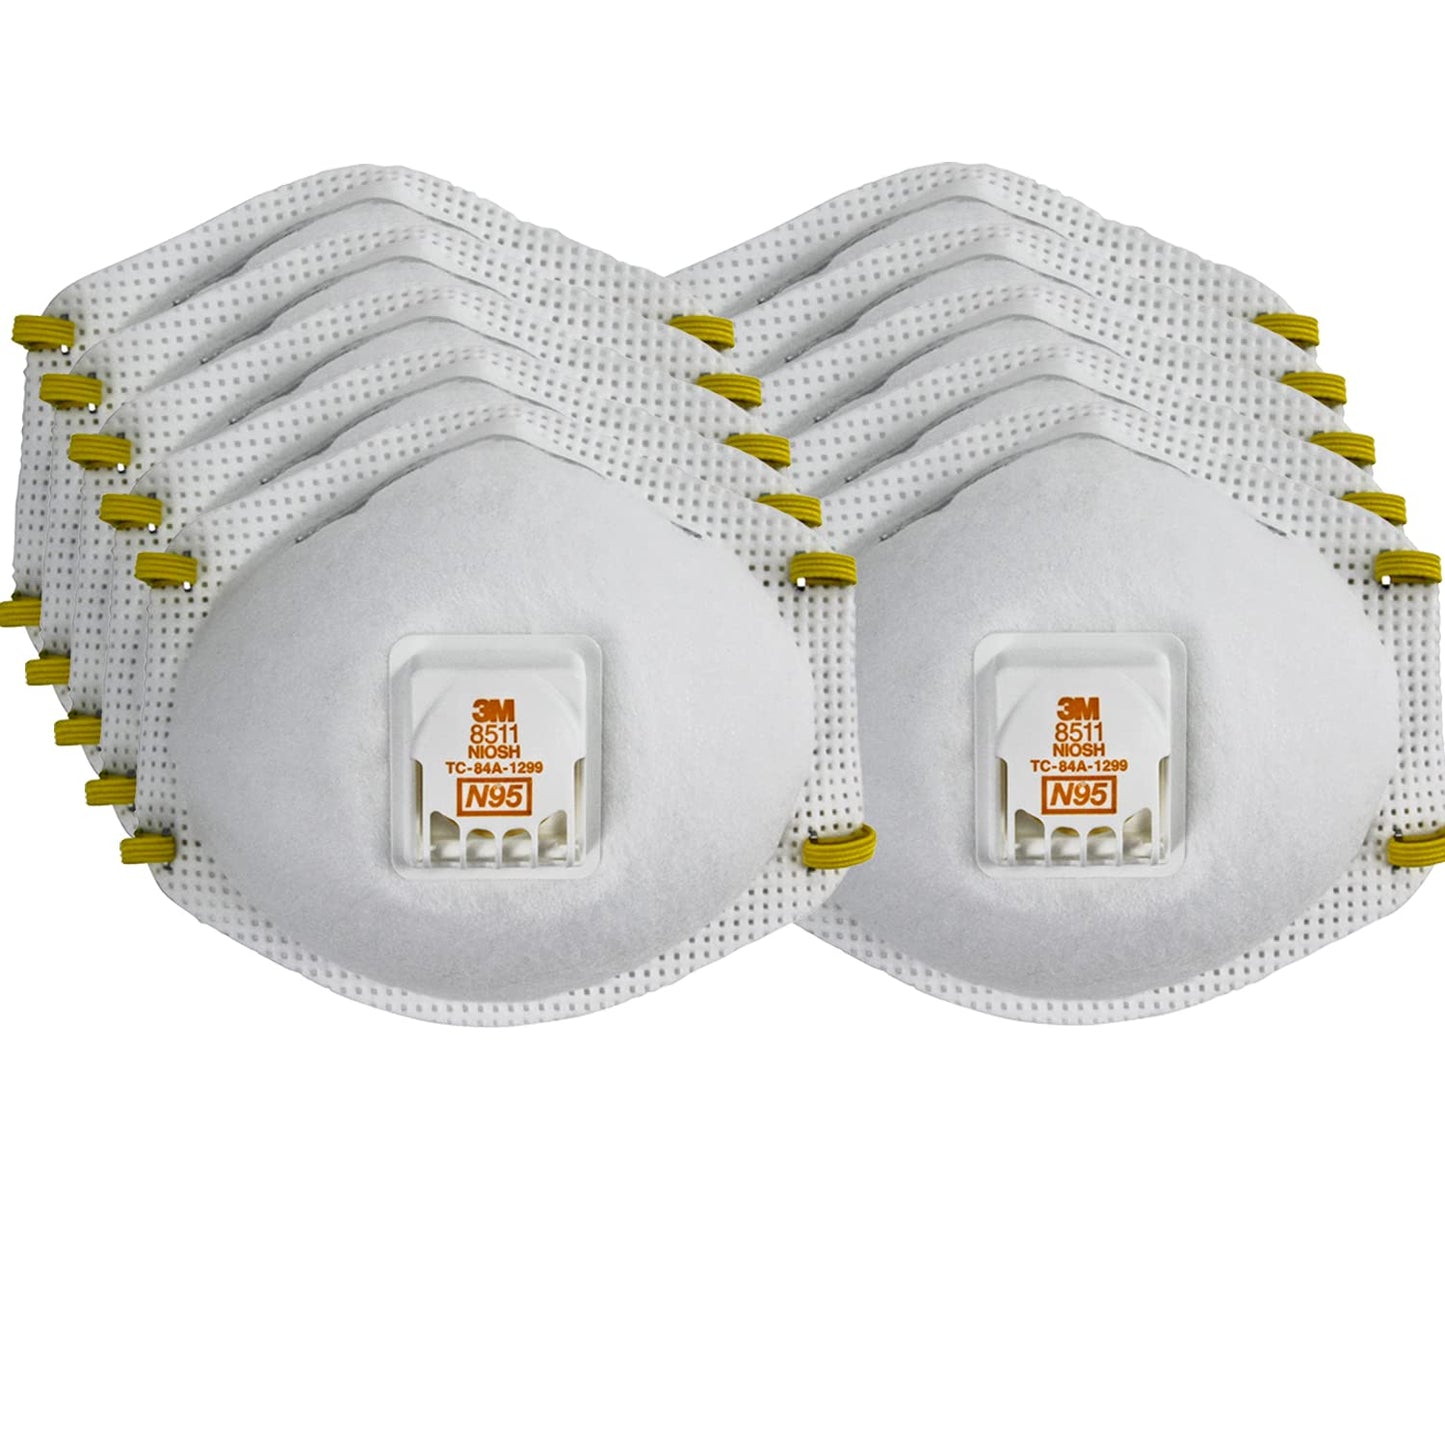 3M Particulate Respirator 8511, Pack of 10, N95, Cool Flow Exhalation Valve, Disposable, Braided Comfort Strap, M Noseclip